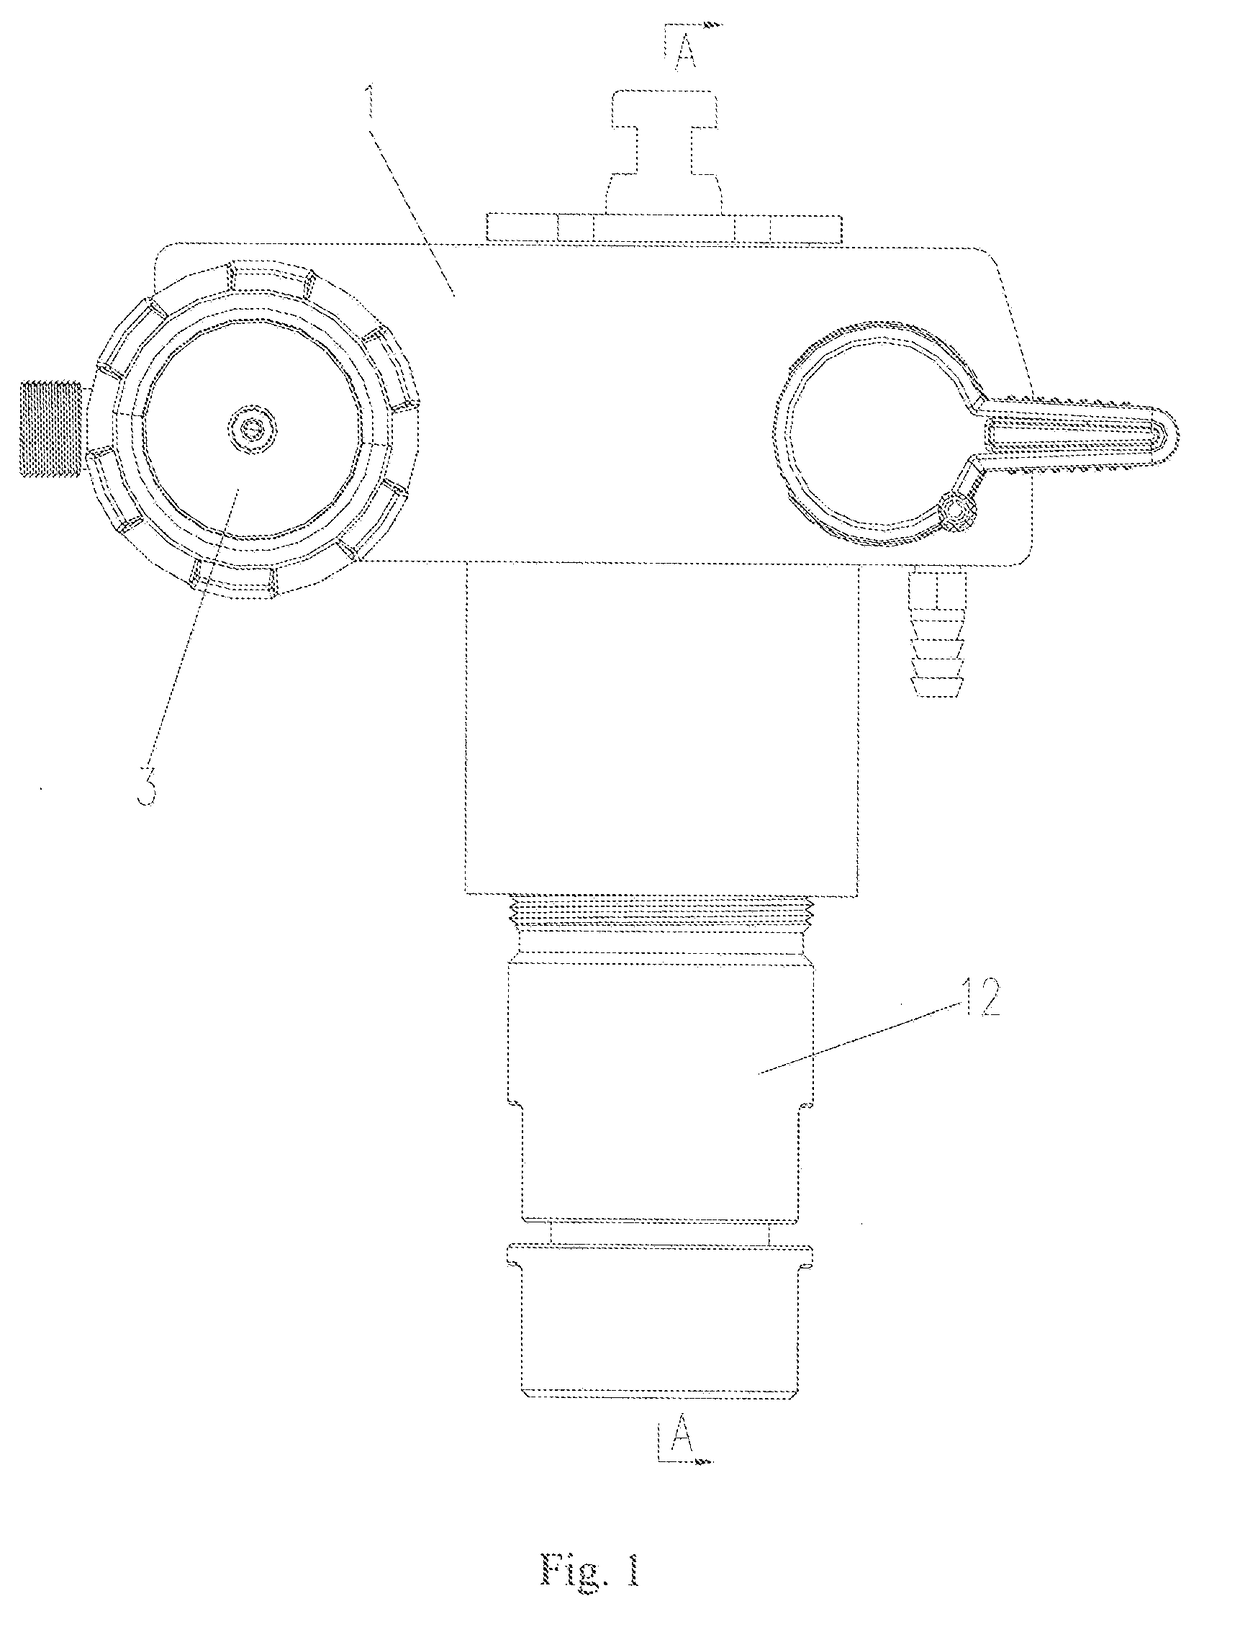 Sealing structure of reciprocating plunger pump